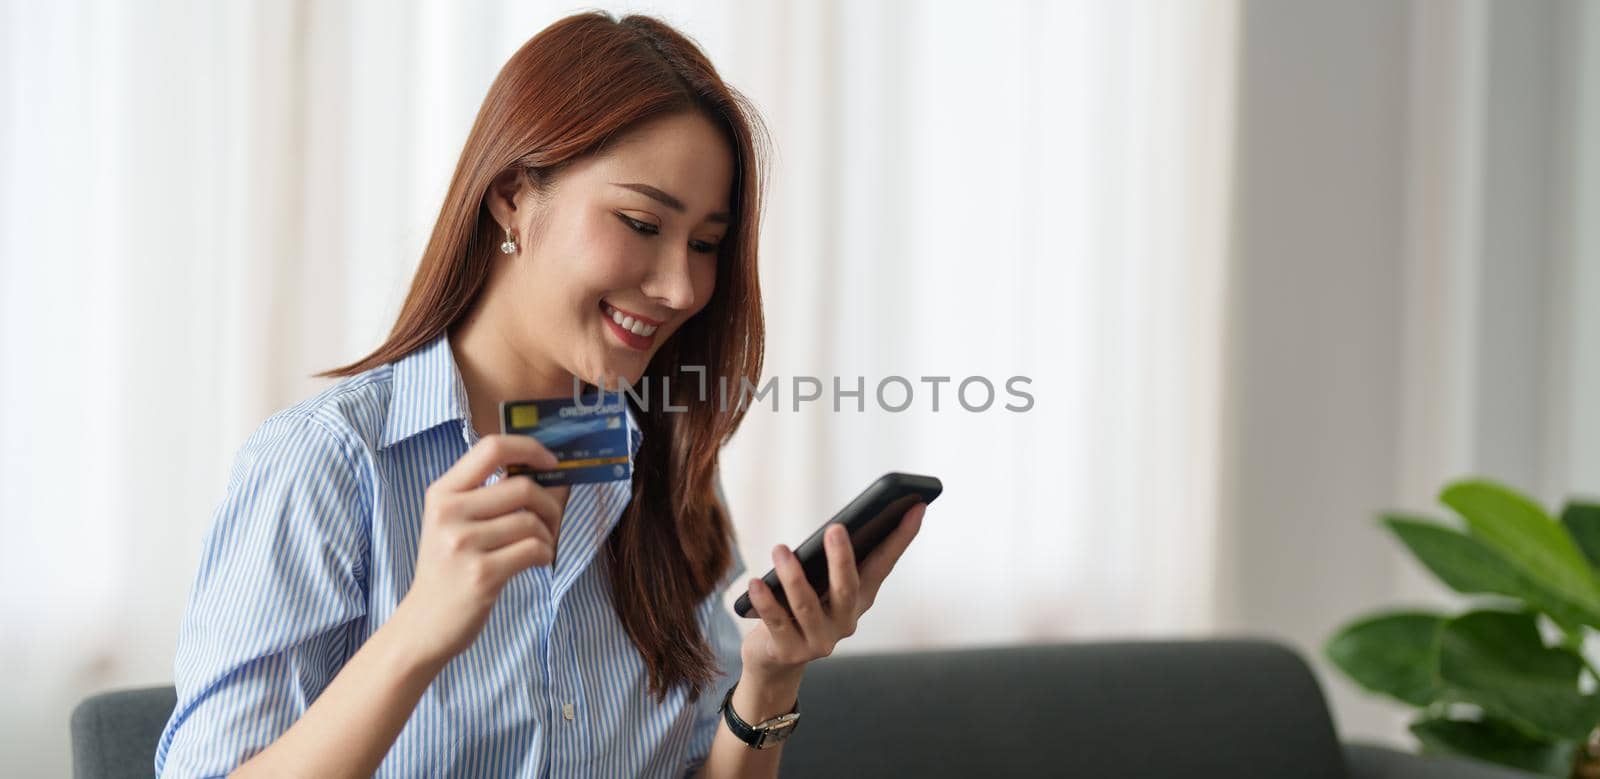 Young beautiful Asian woman using smartphone and credit card for online shopping at home with copy space. E-payment technology, shopaholic lifestyle, or mobile phone financial application concept.